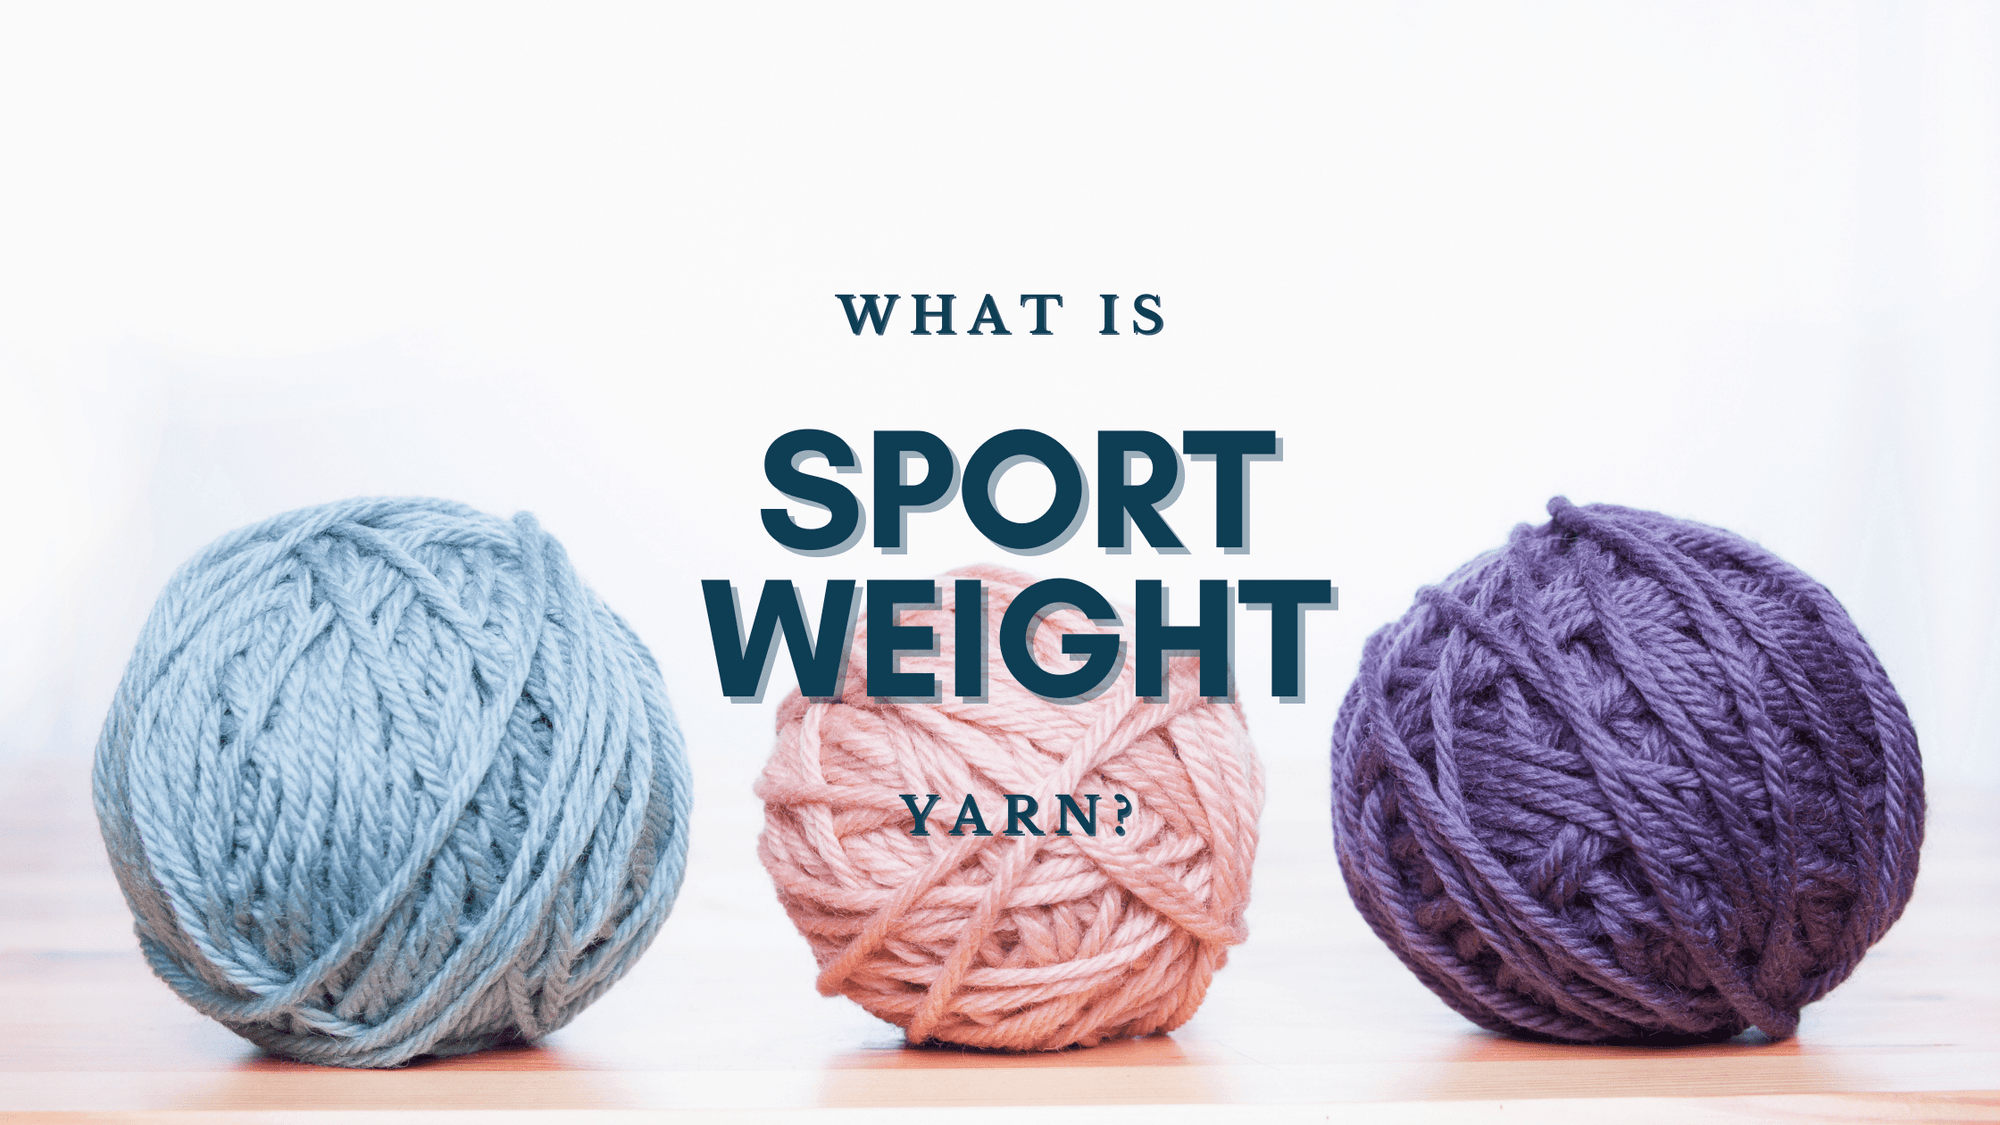 What is sport weight yarn?